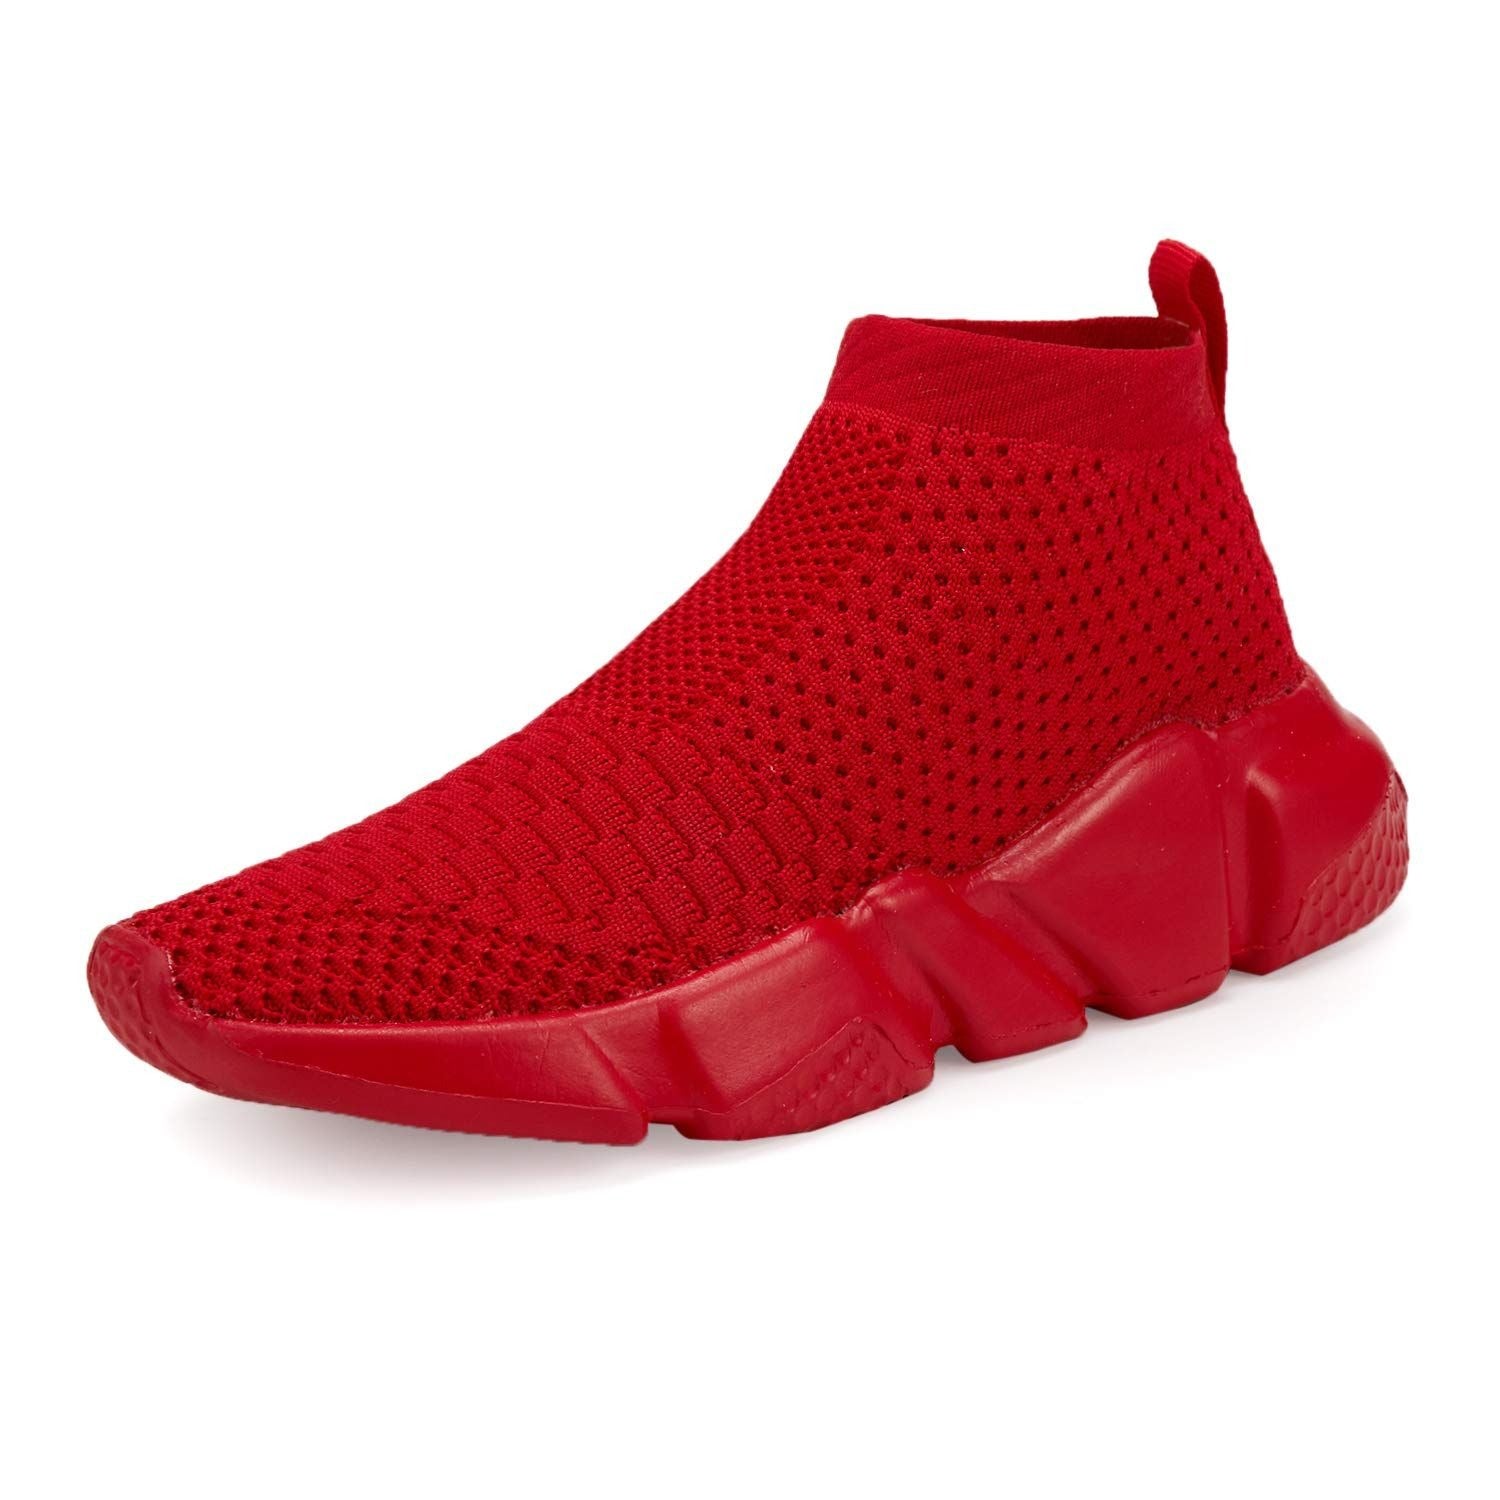 Red Knit Boys' High-Top Sneakers for Toddlers - Size 13 Red Mesh Athletic Shoes